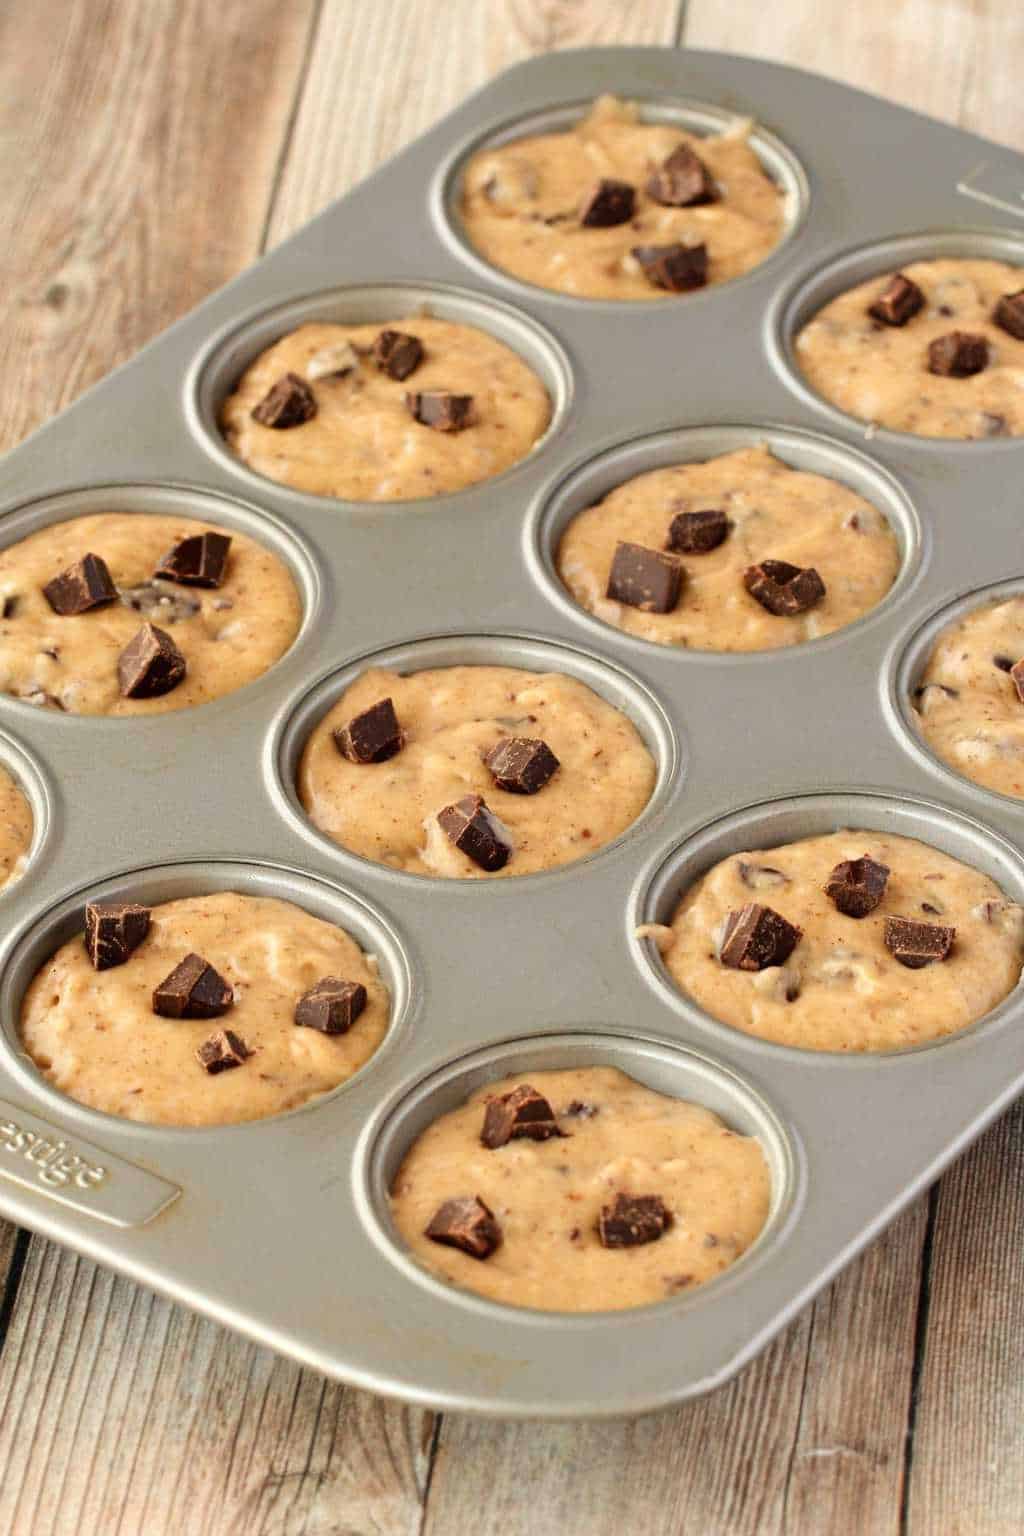 Vegan banana chocolate chip muffin batter in a muffin tray ready to go into the oven and bake.